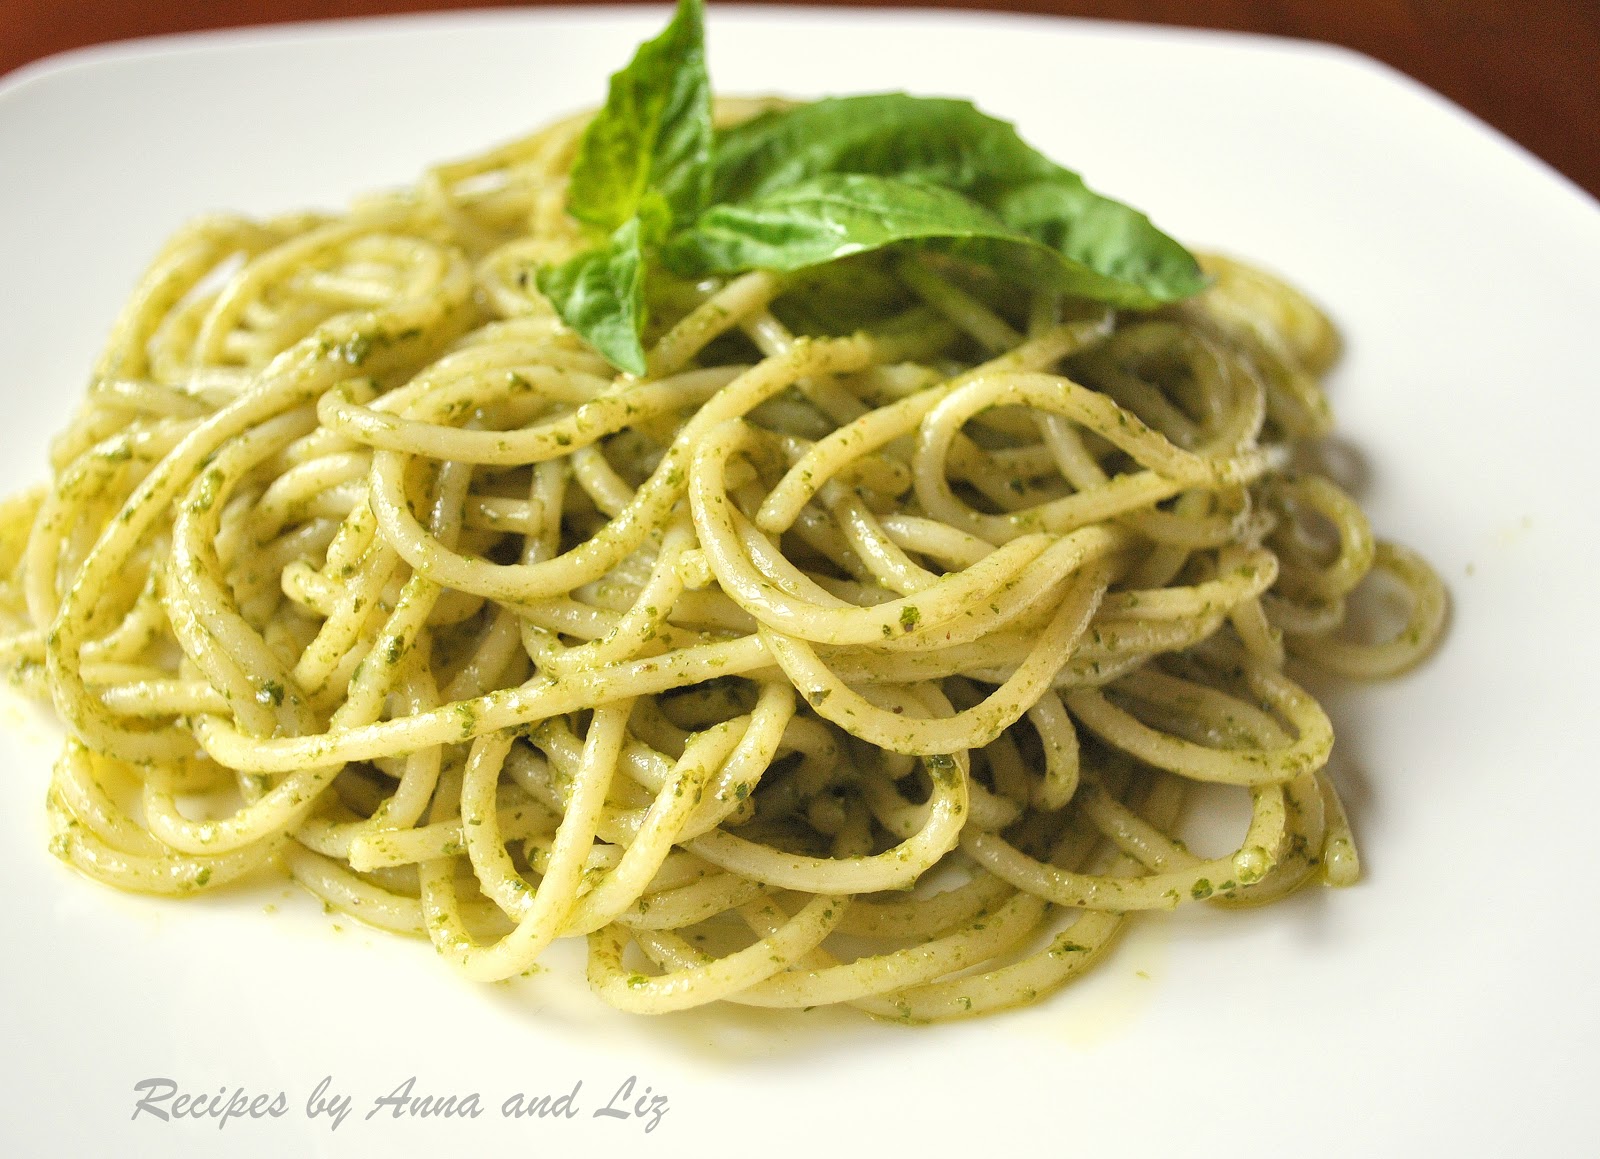 Spaghetti with Basil Pesto Sauce - 2 Sisters Recipes by Anna and Liz